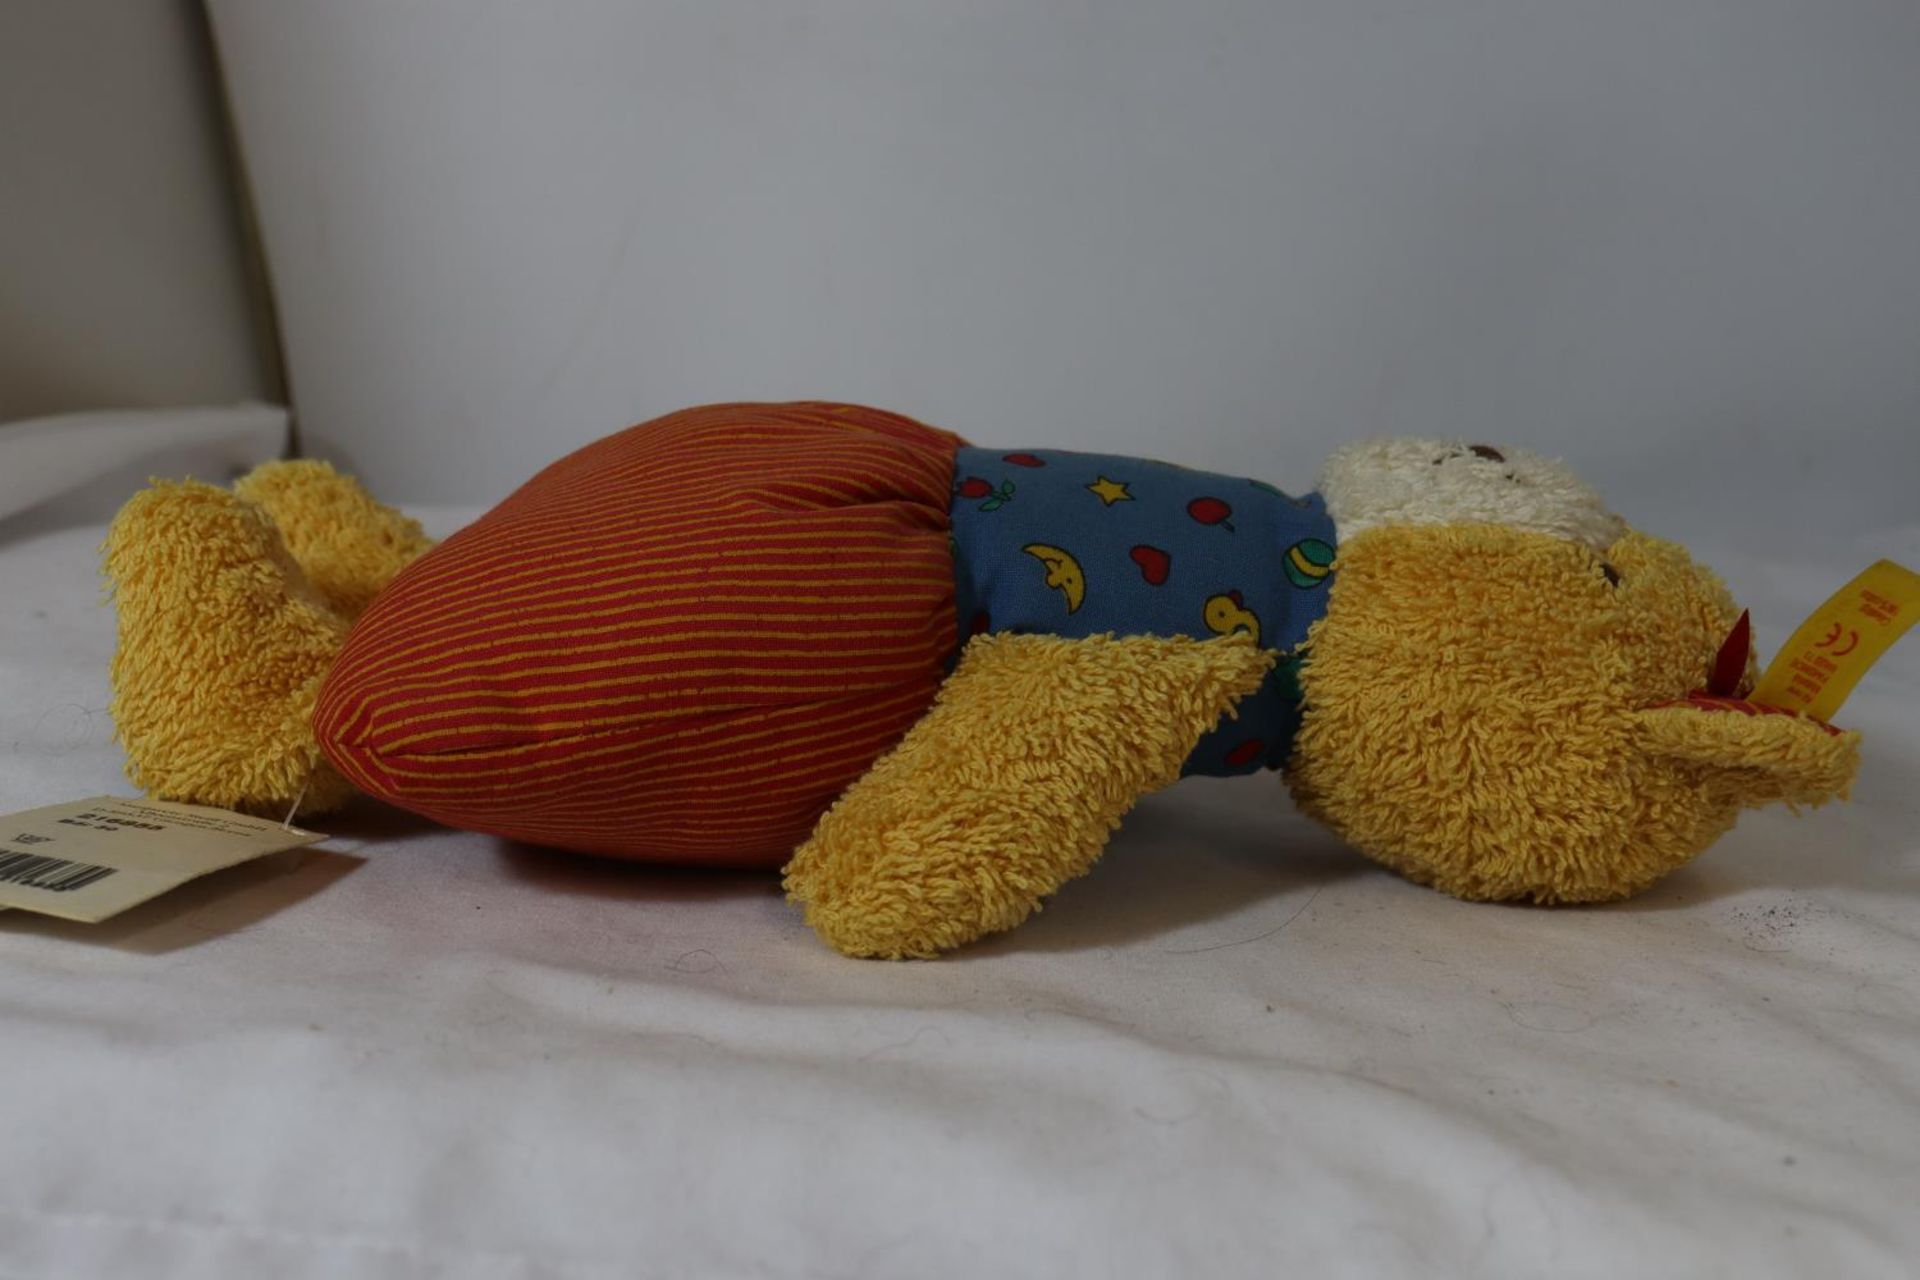 A STEIFF 'BABYARTIKEL' TEDDY BEAR, WITH BUTTON TO EAR, NO. 216855 - Image 3 of 3